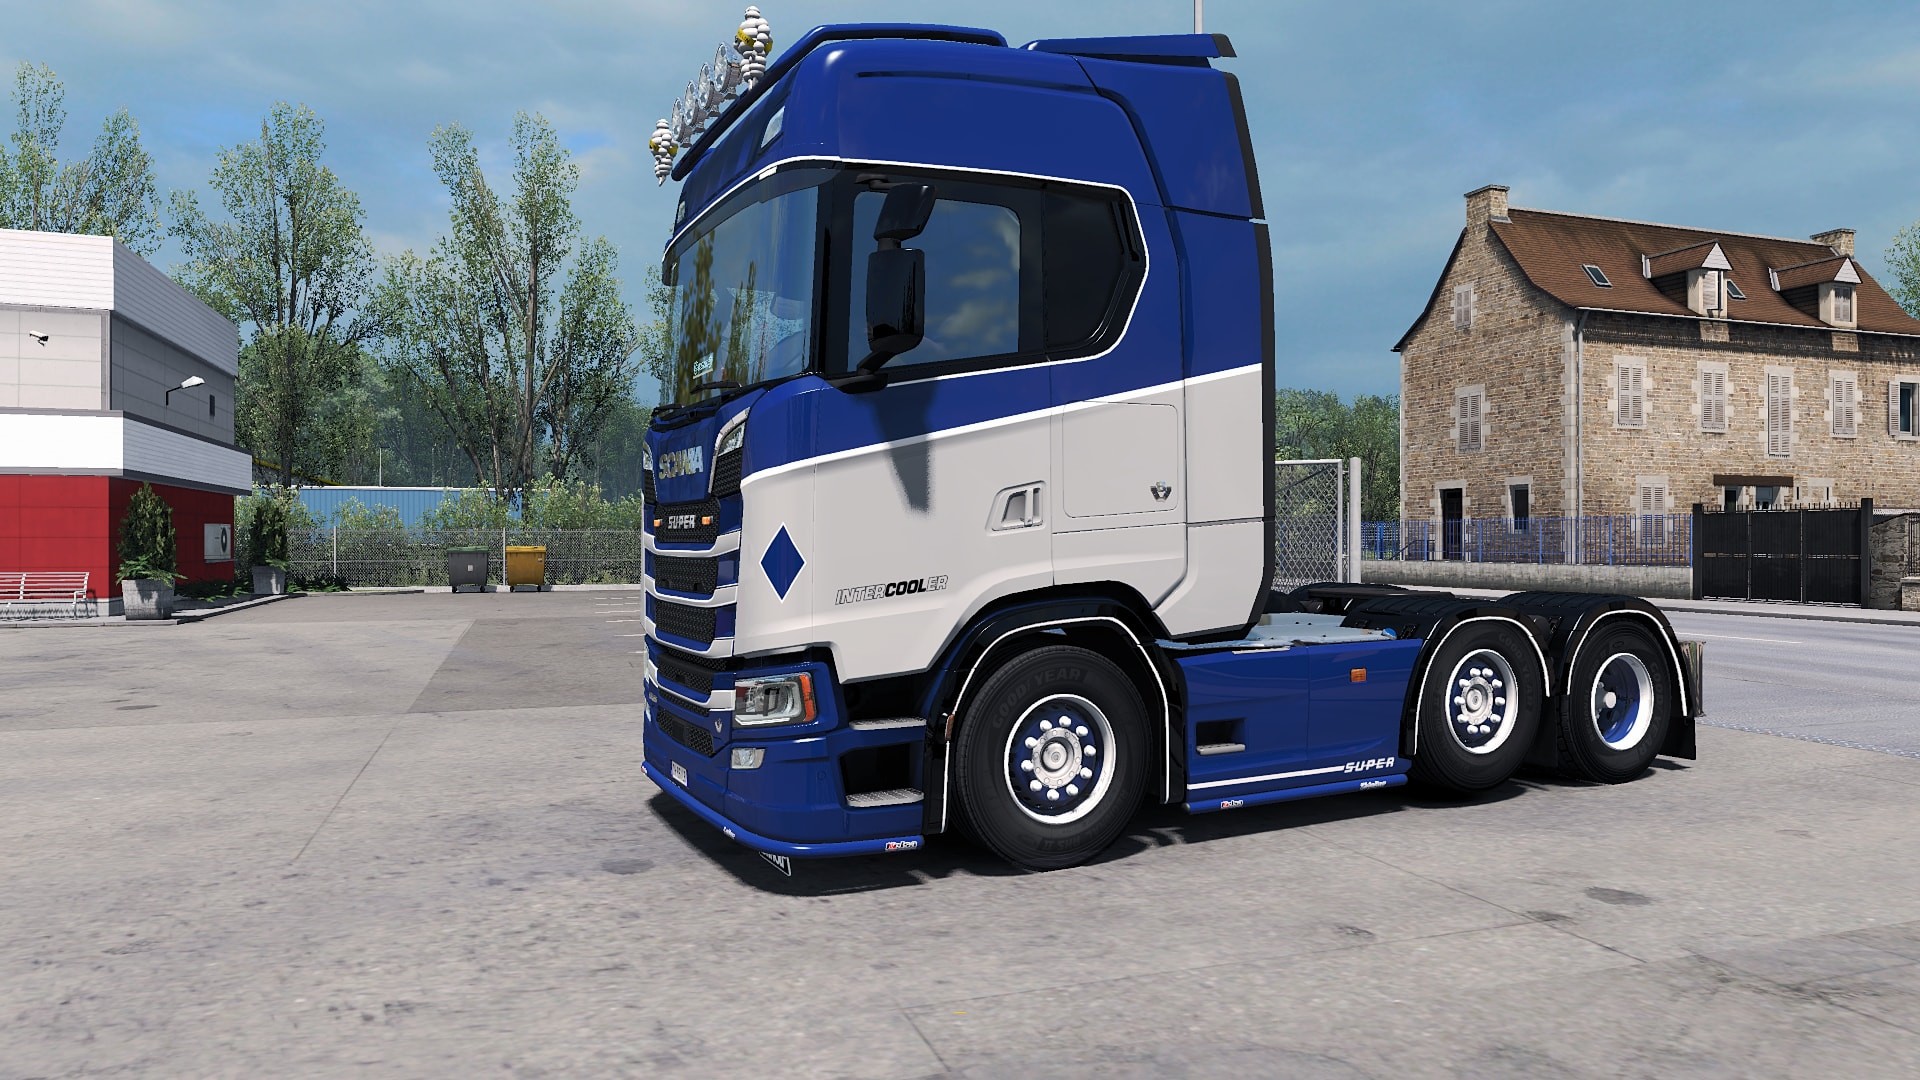 Scania S - Noname.01 by l1zzy